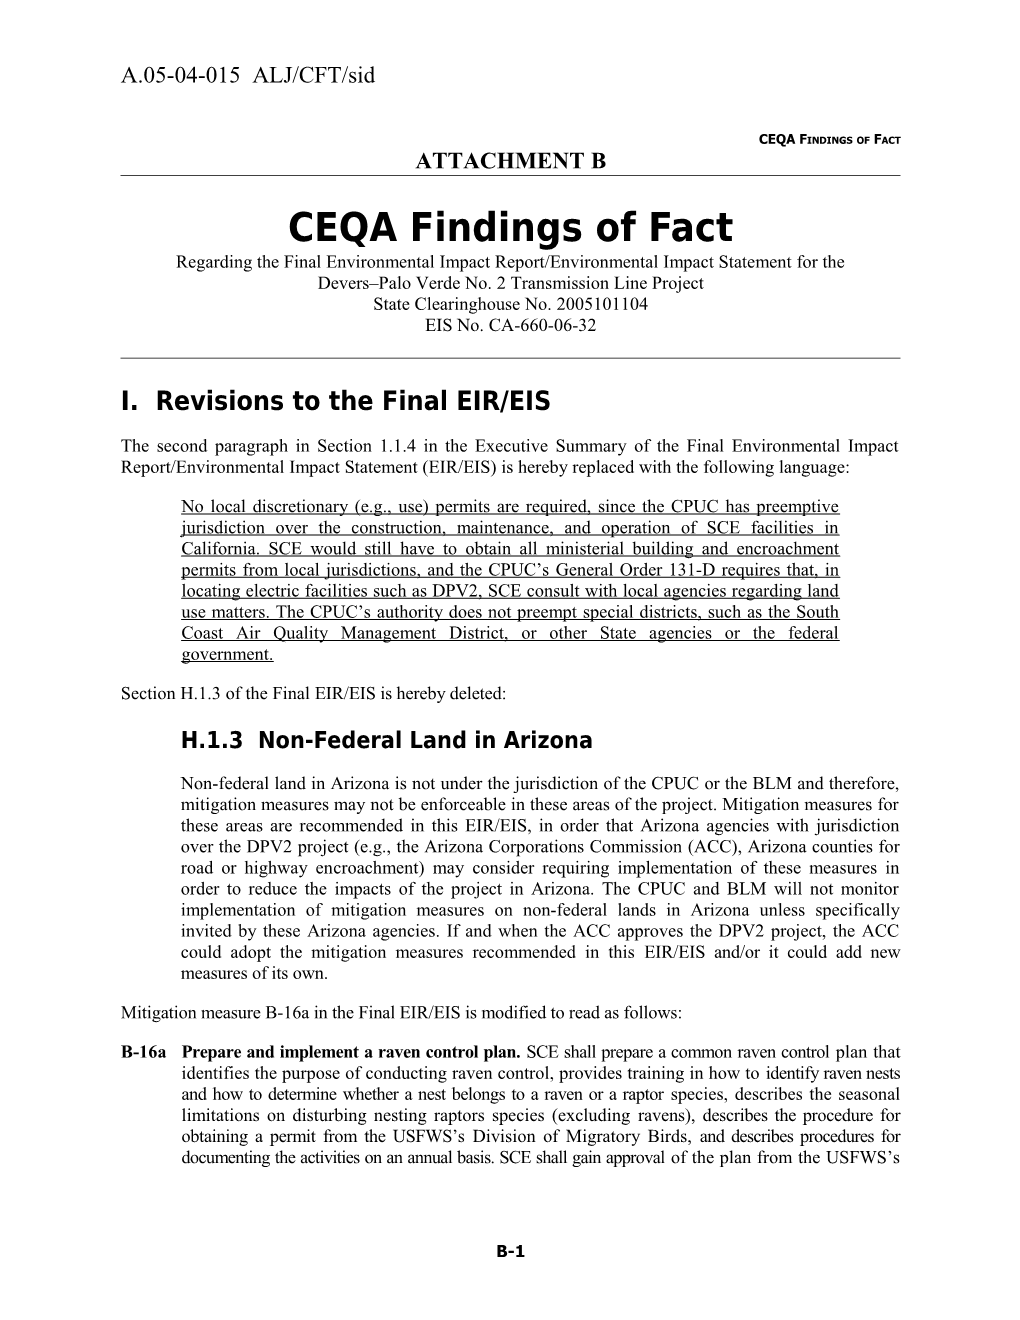 CEQA Findings of Fact